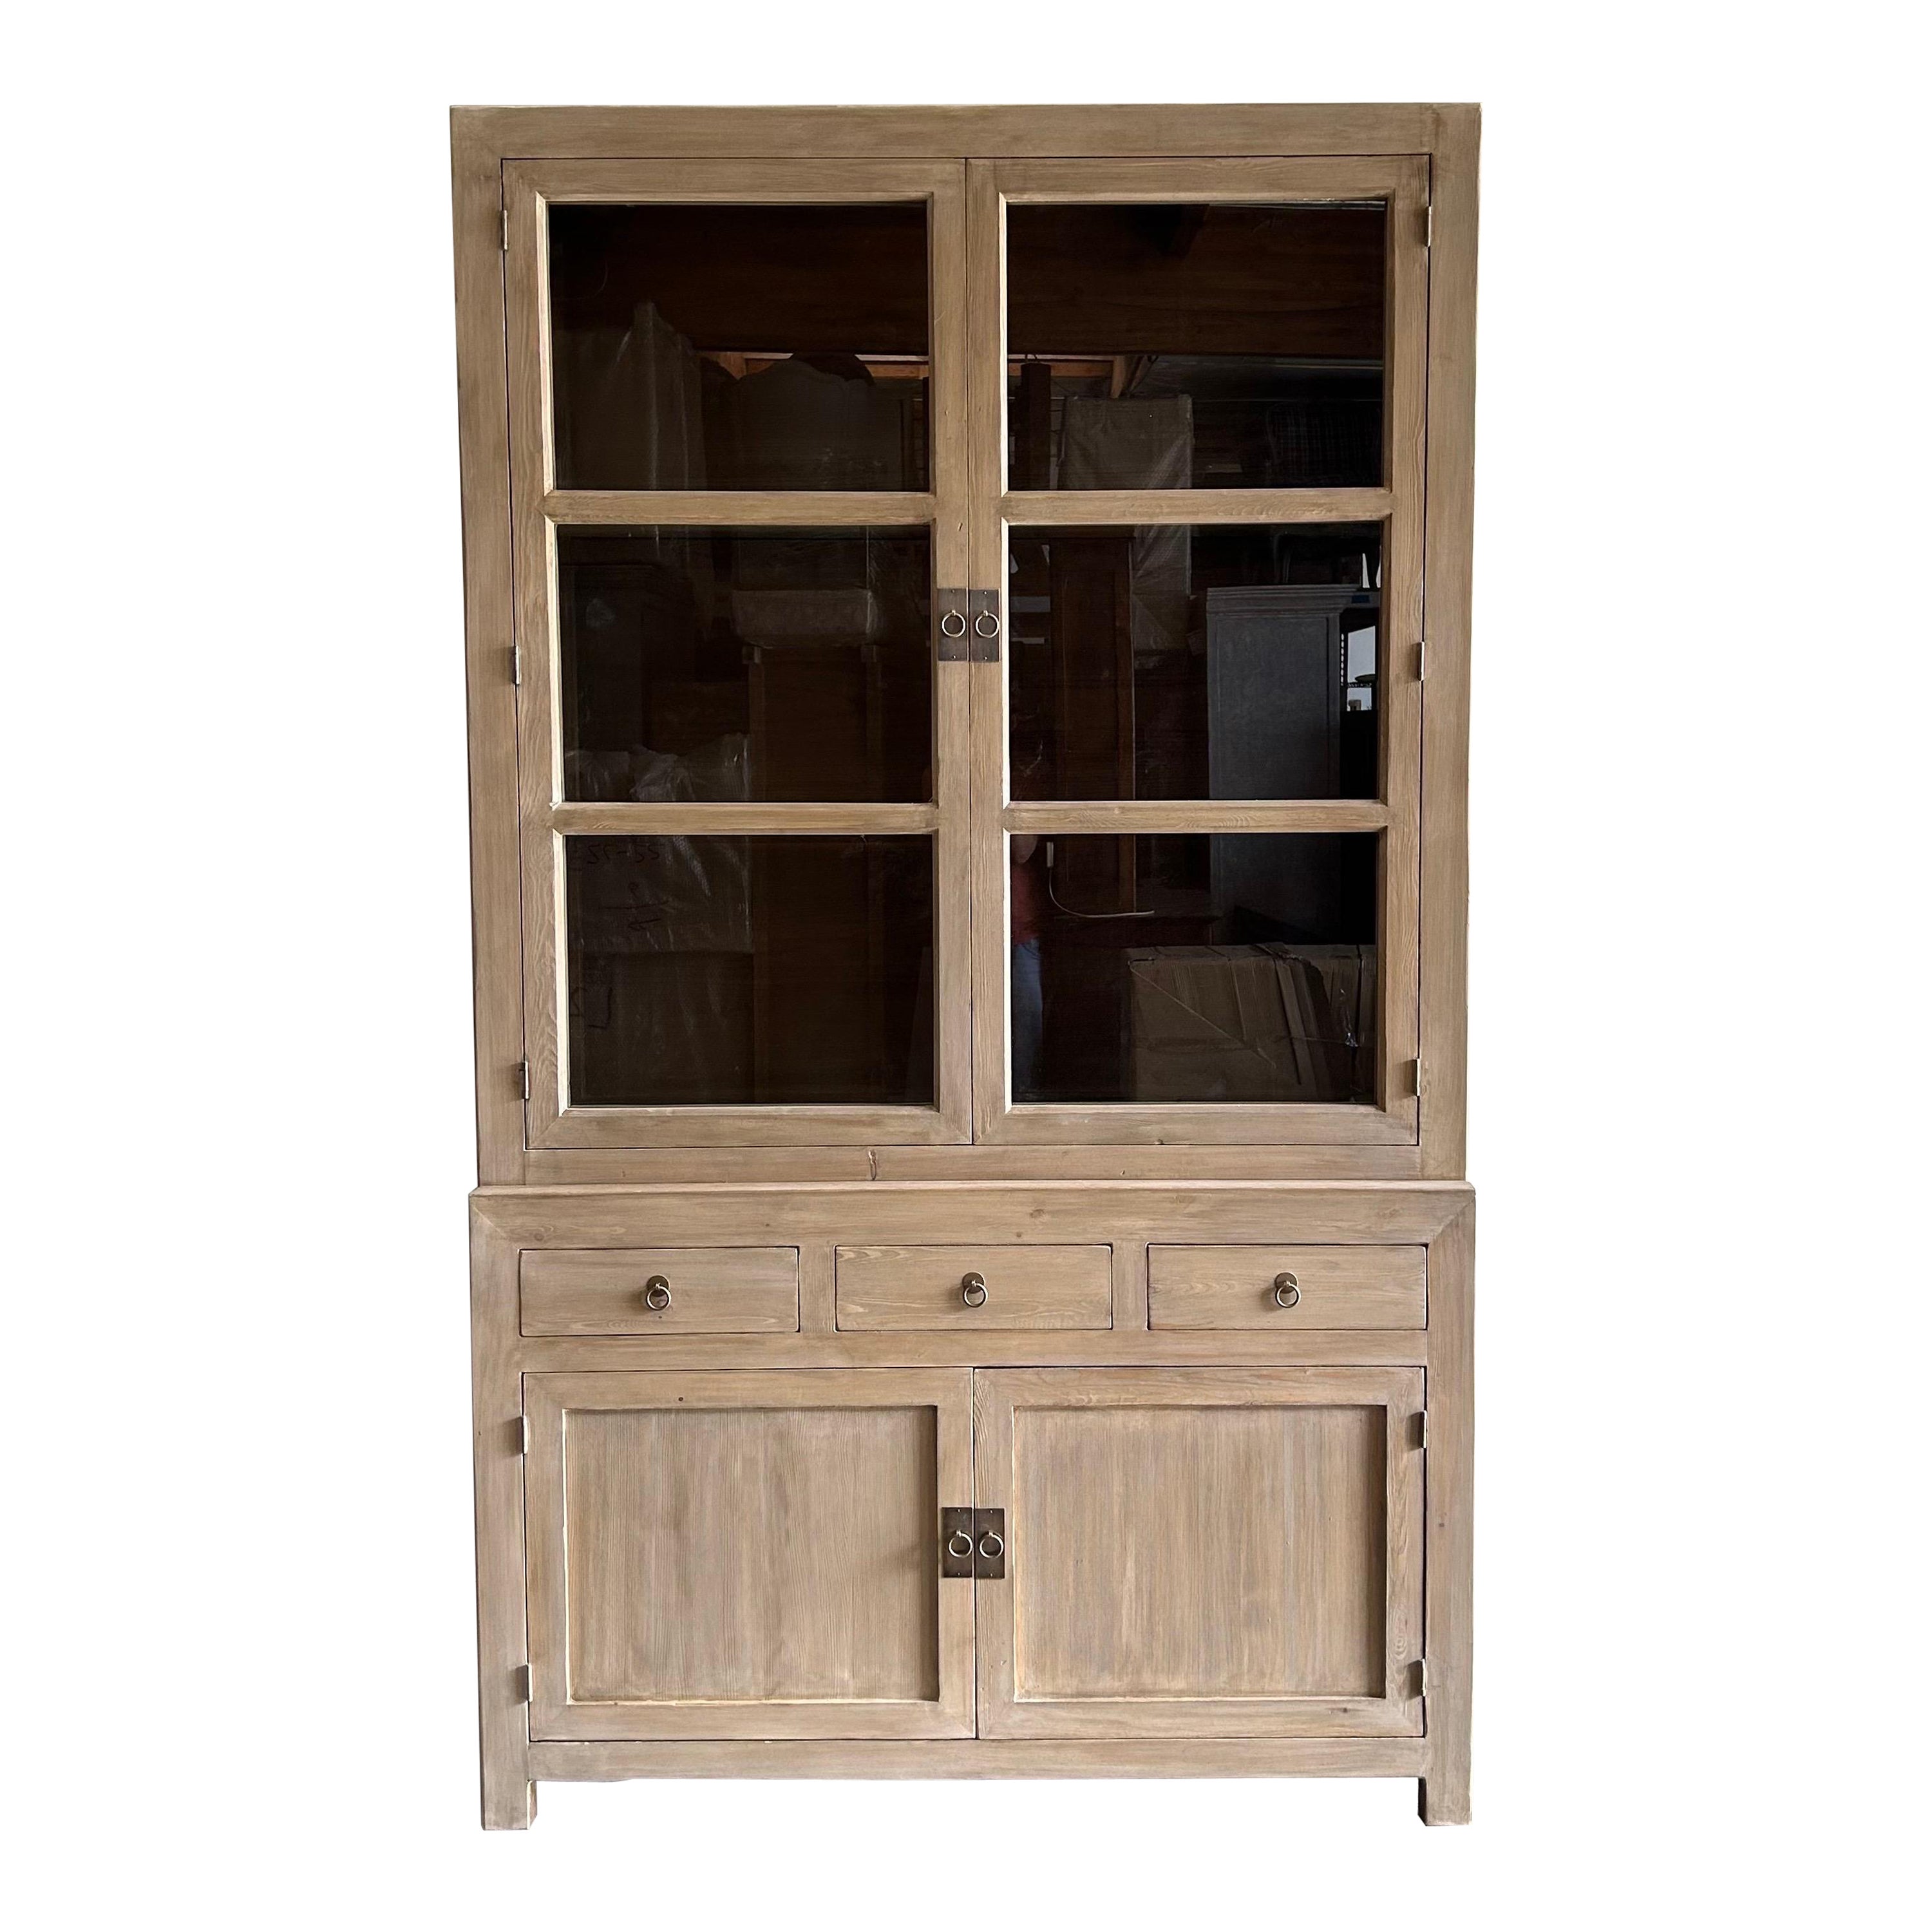 Reclaimed Elm Wood Cabinet or Hutch